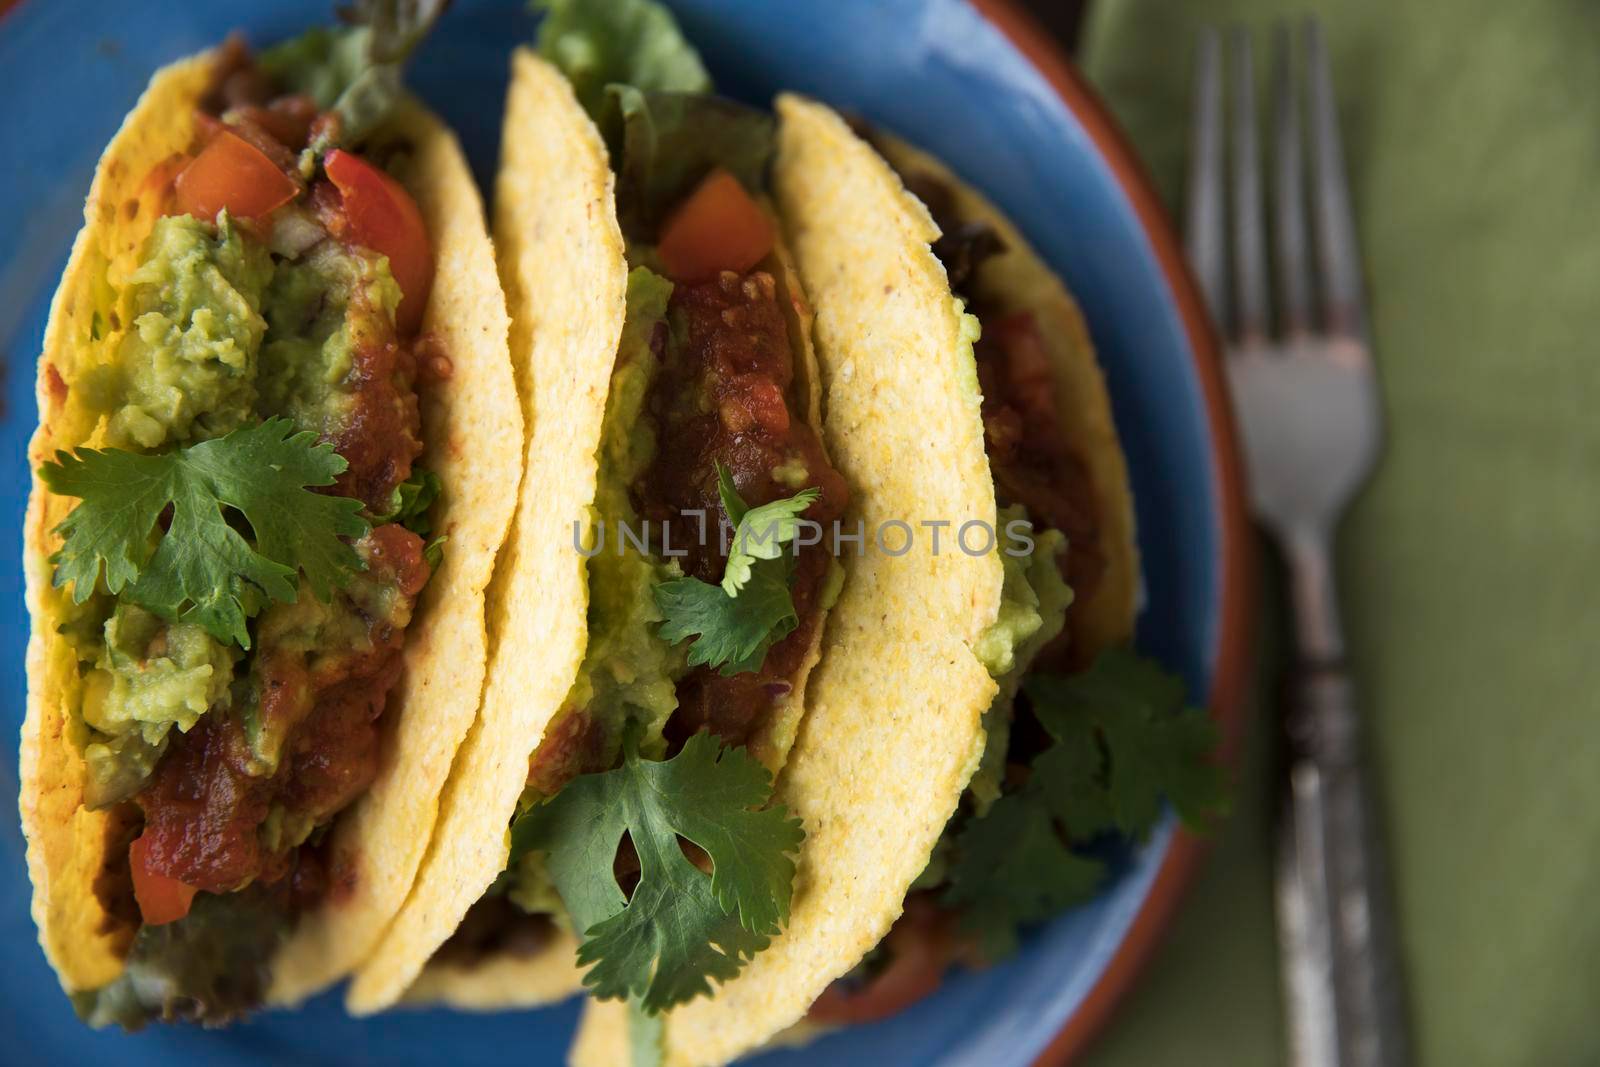 Spicy Lentil Tacos From Above by charlotteLake